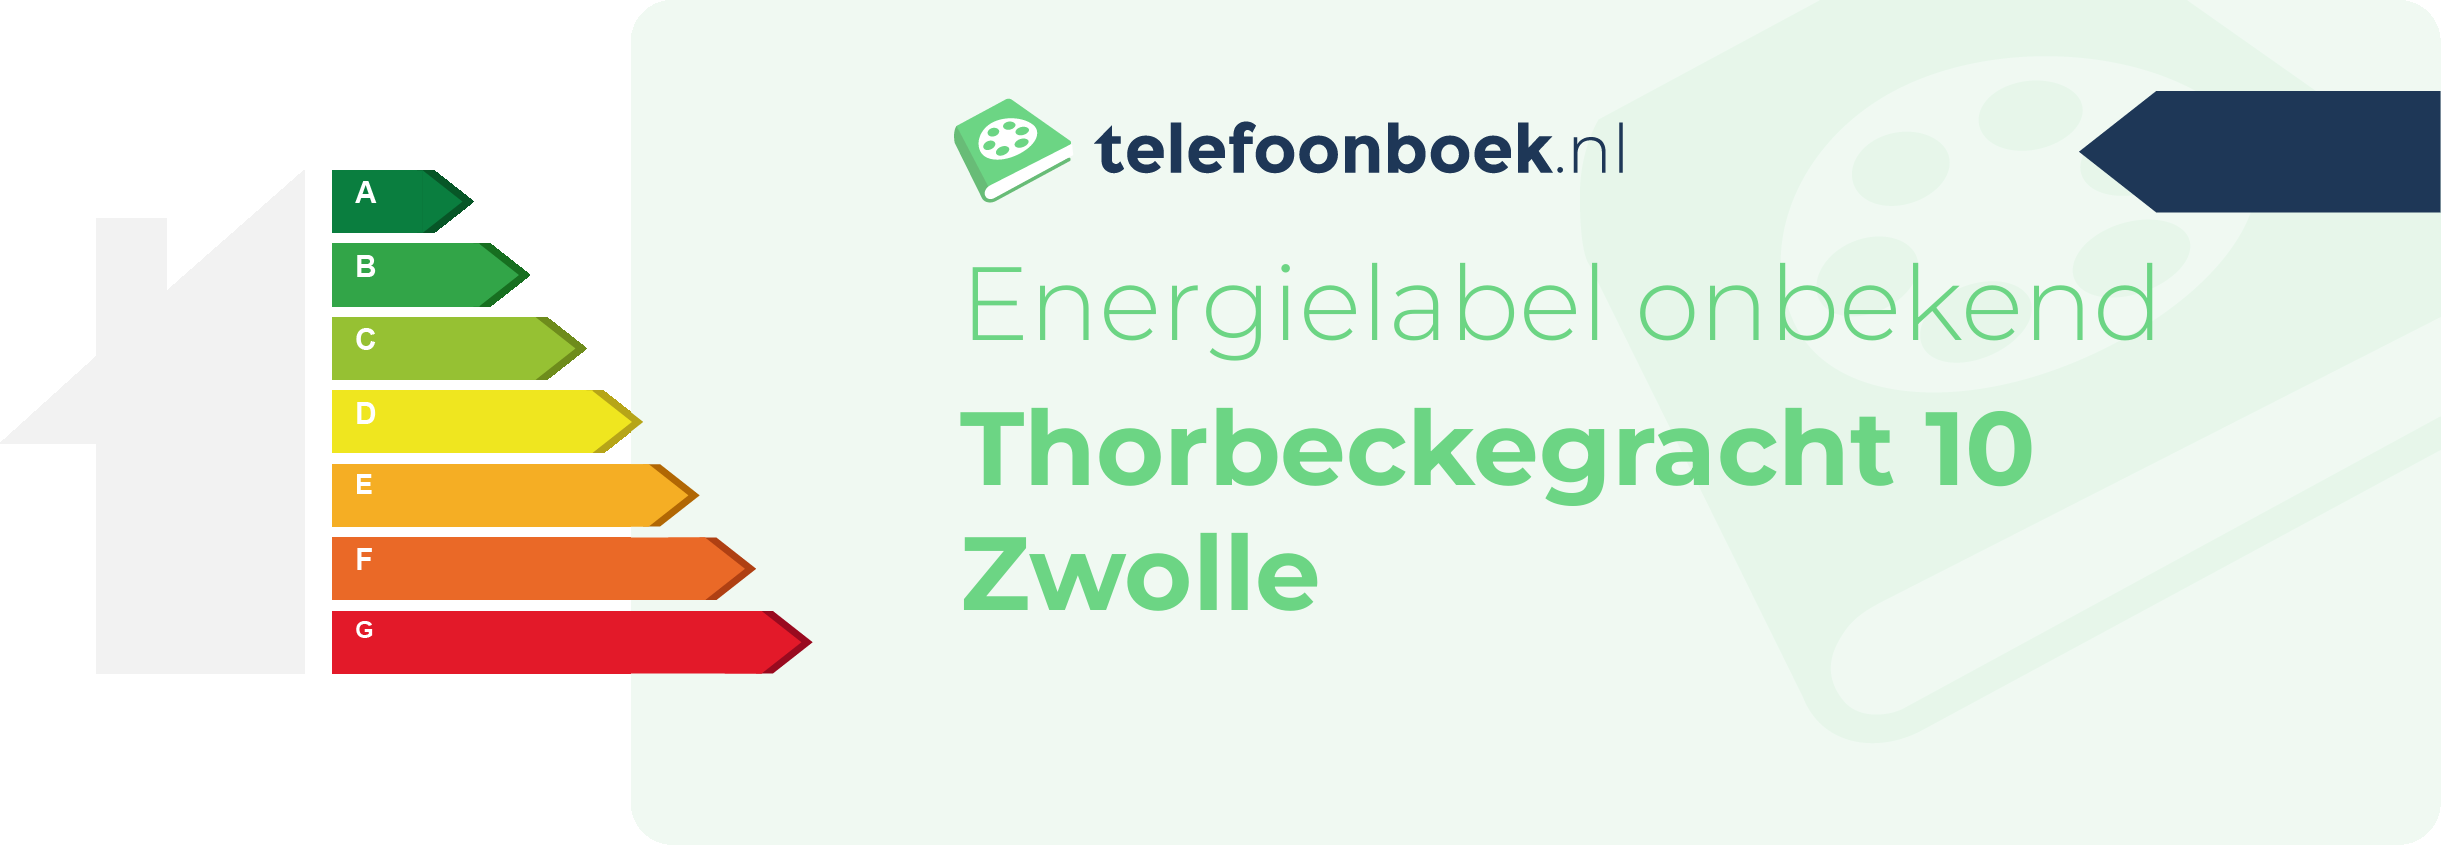 Energielabel Thorbeckegracht 10 Zwolle